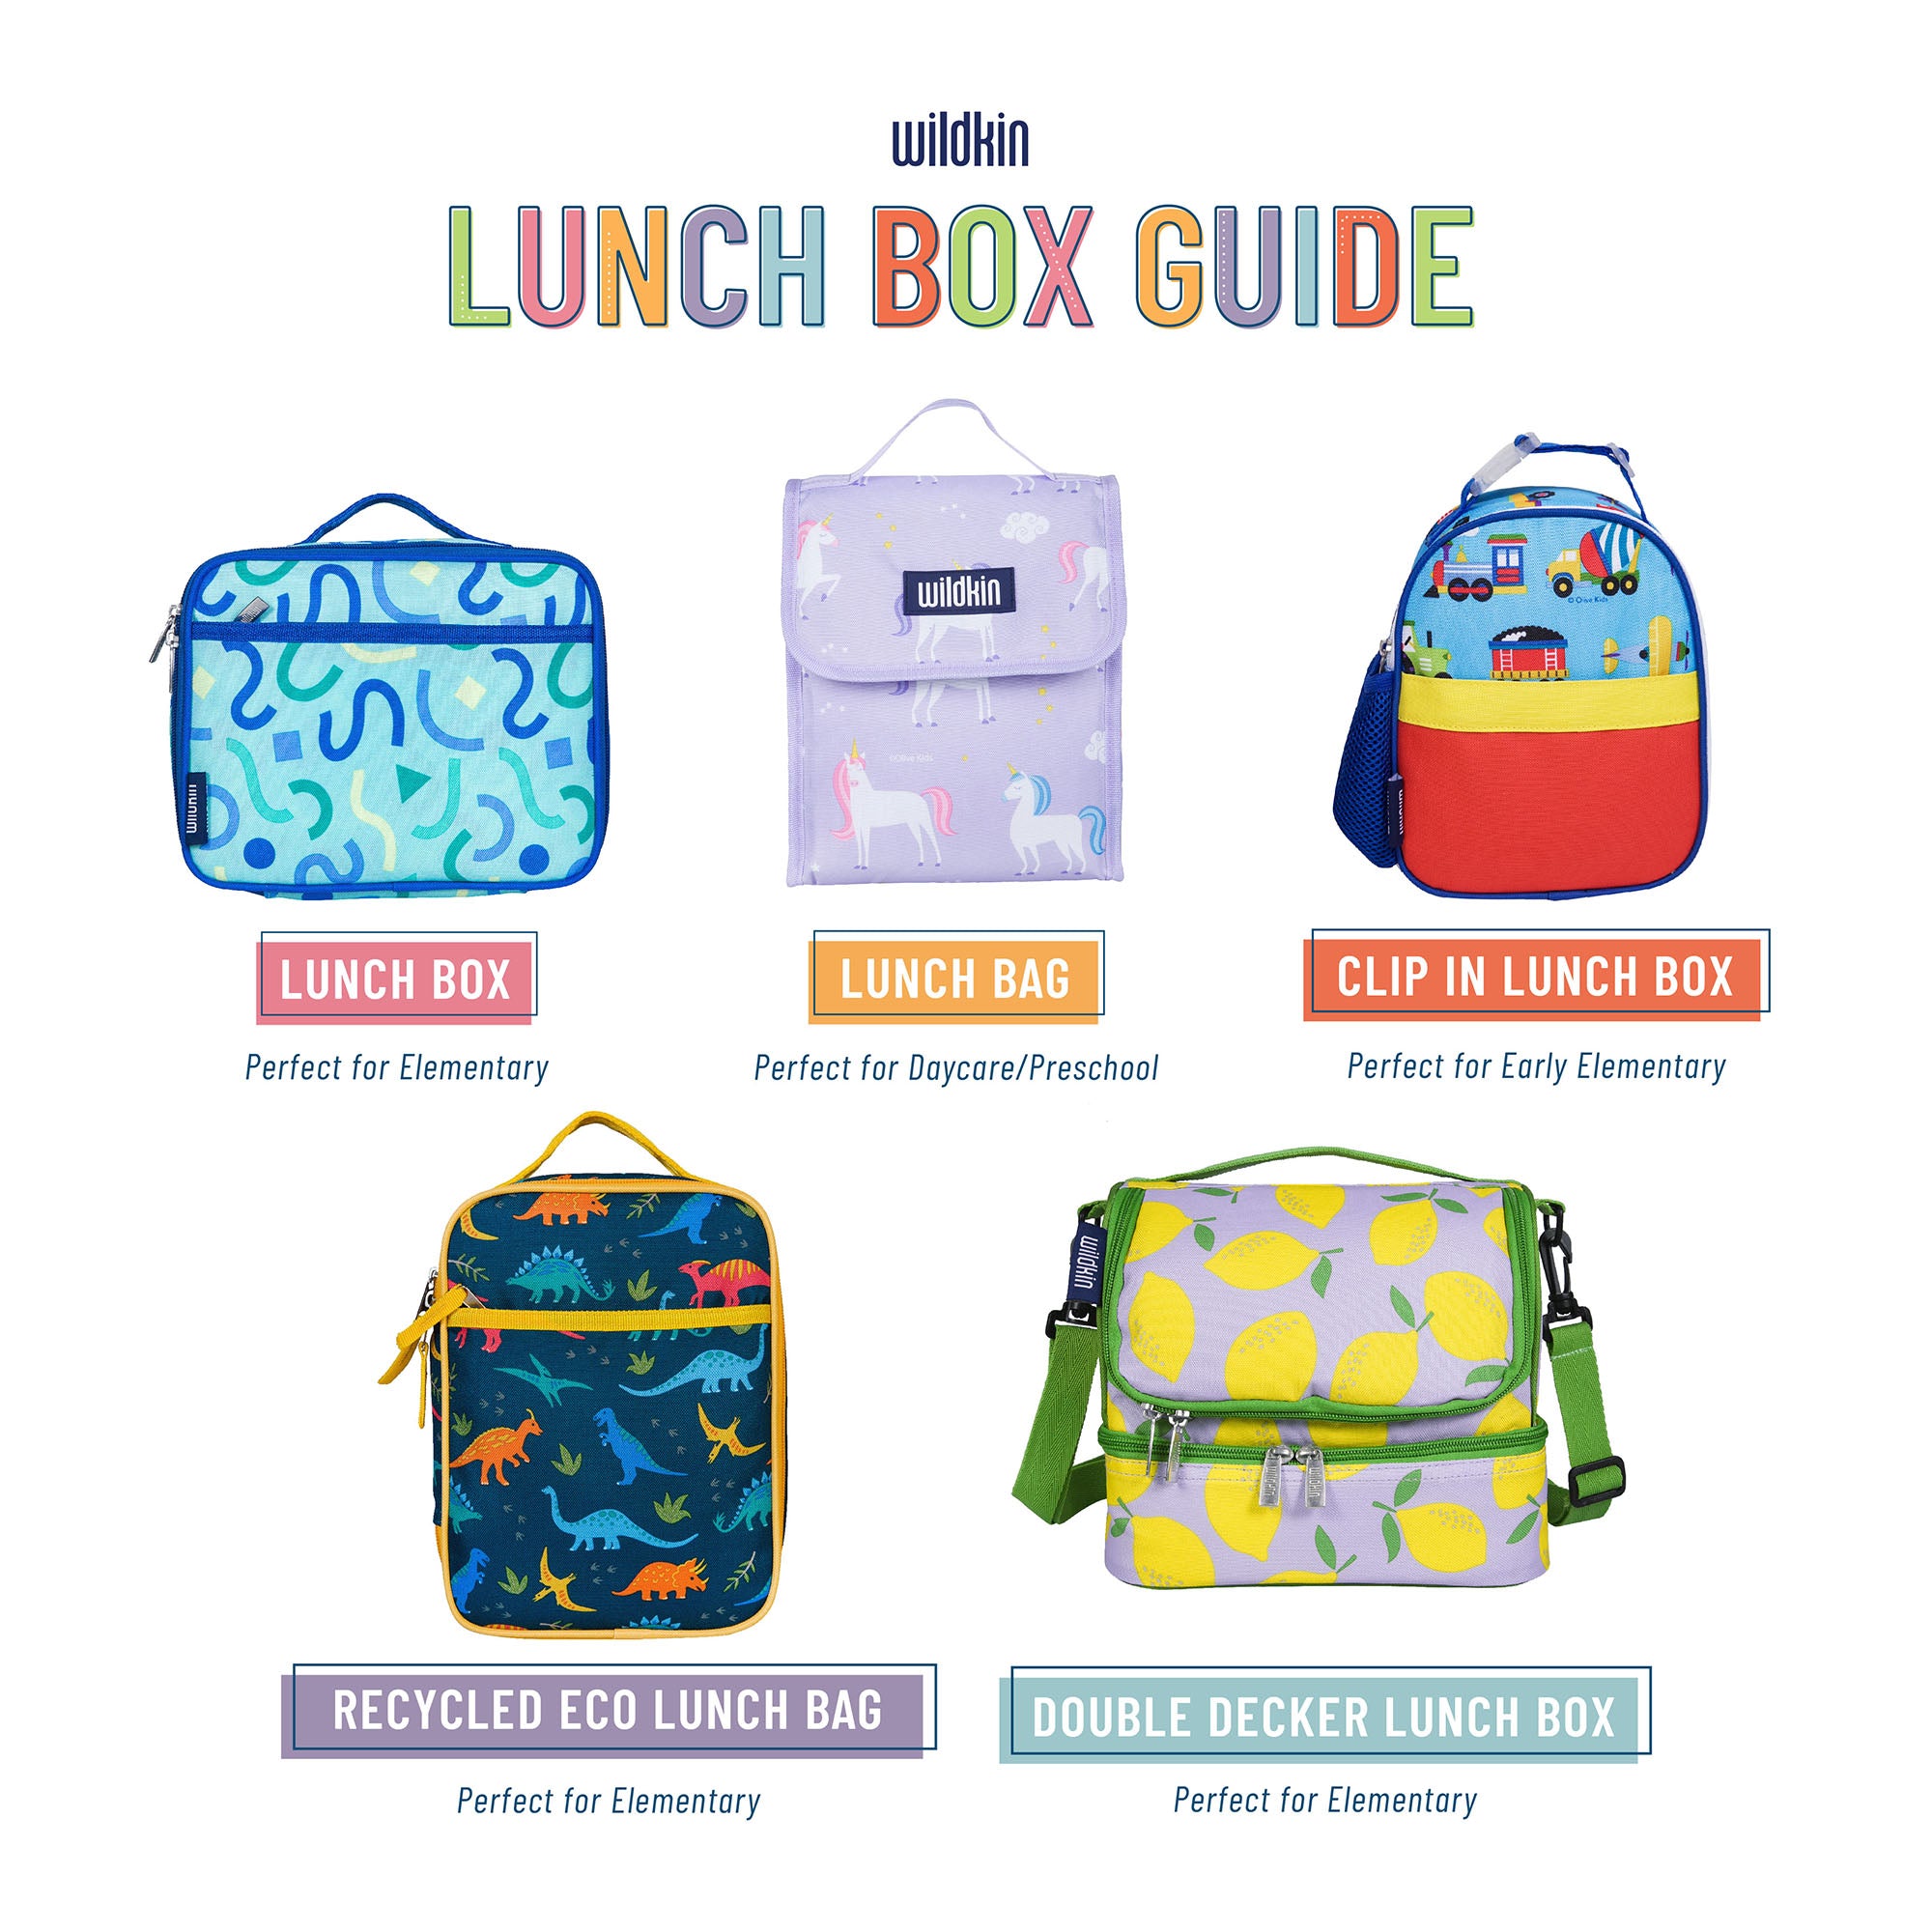 Clear Lunchbox Hydration Pack - Lunchbox Packs